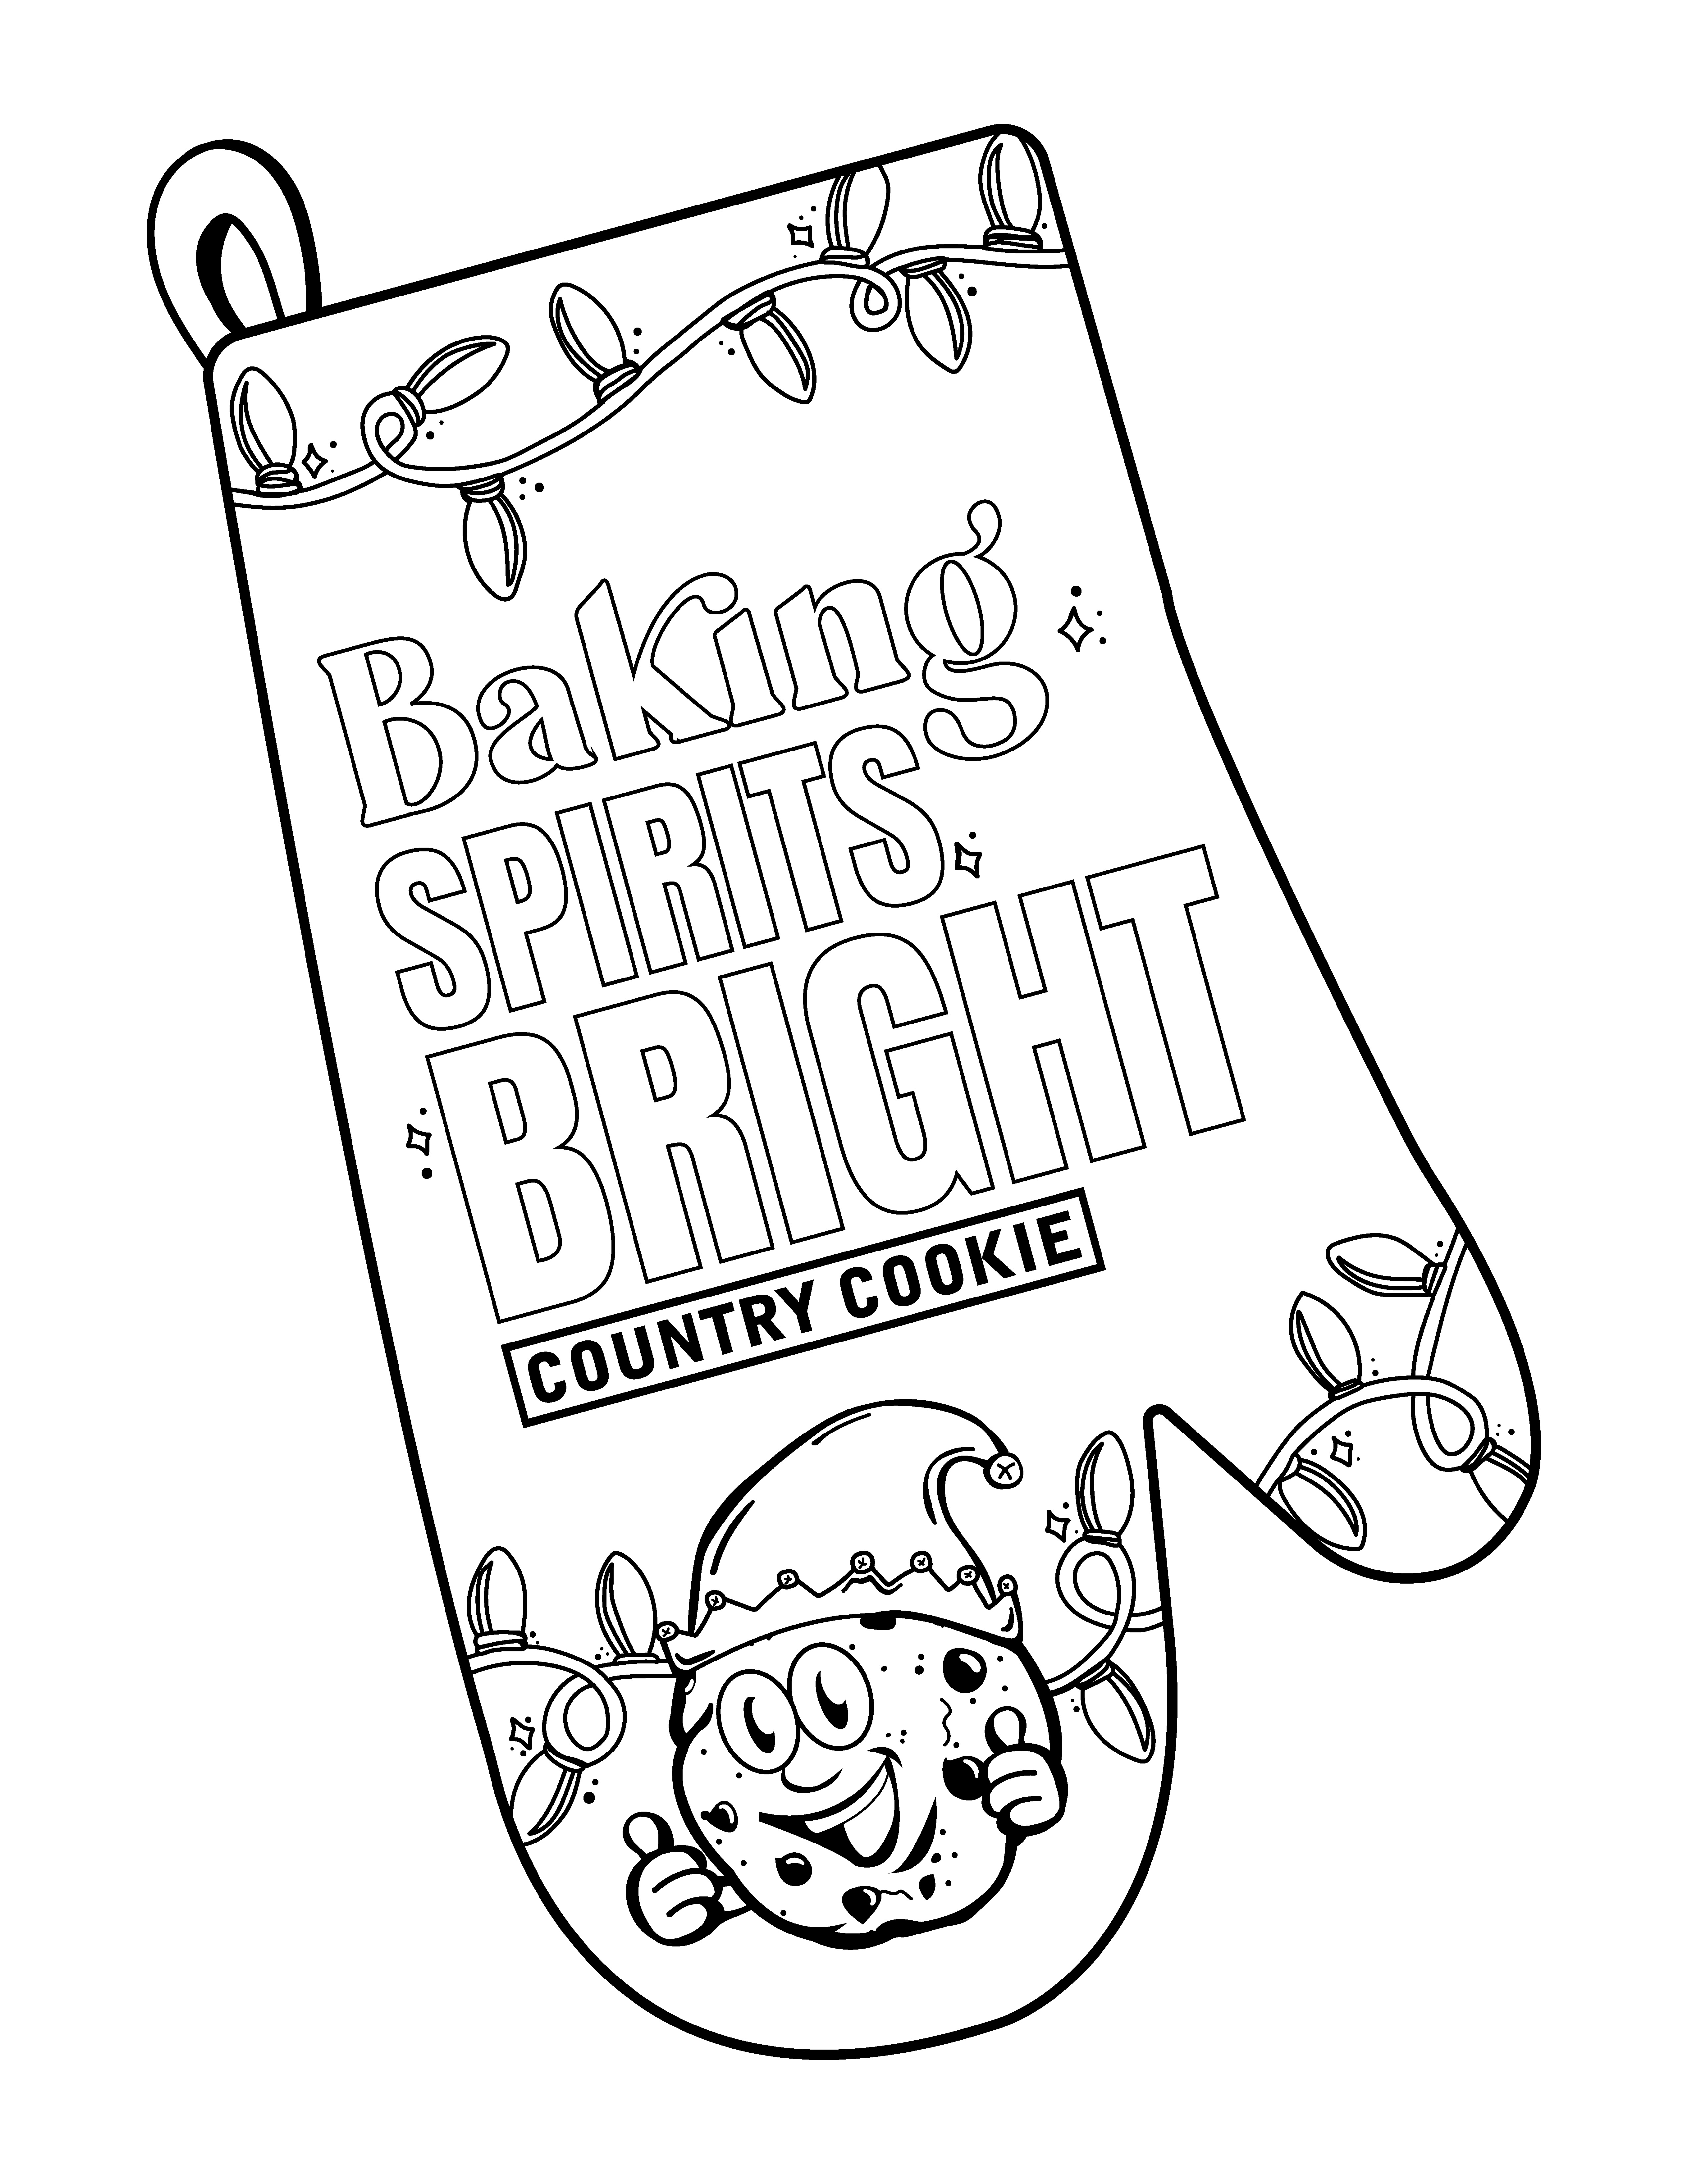 Coloring pages â country cookie